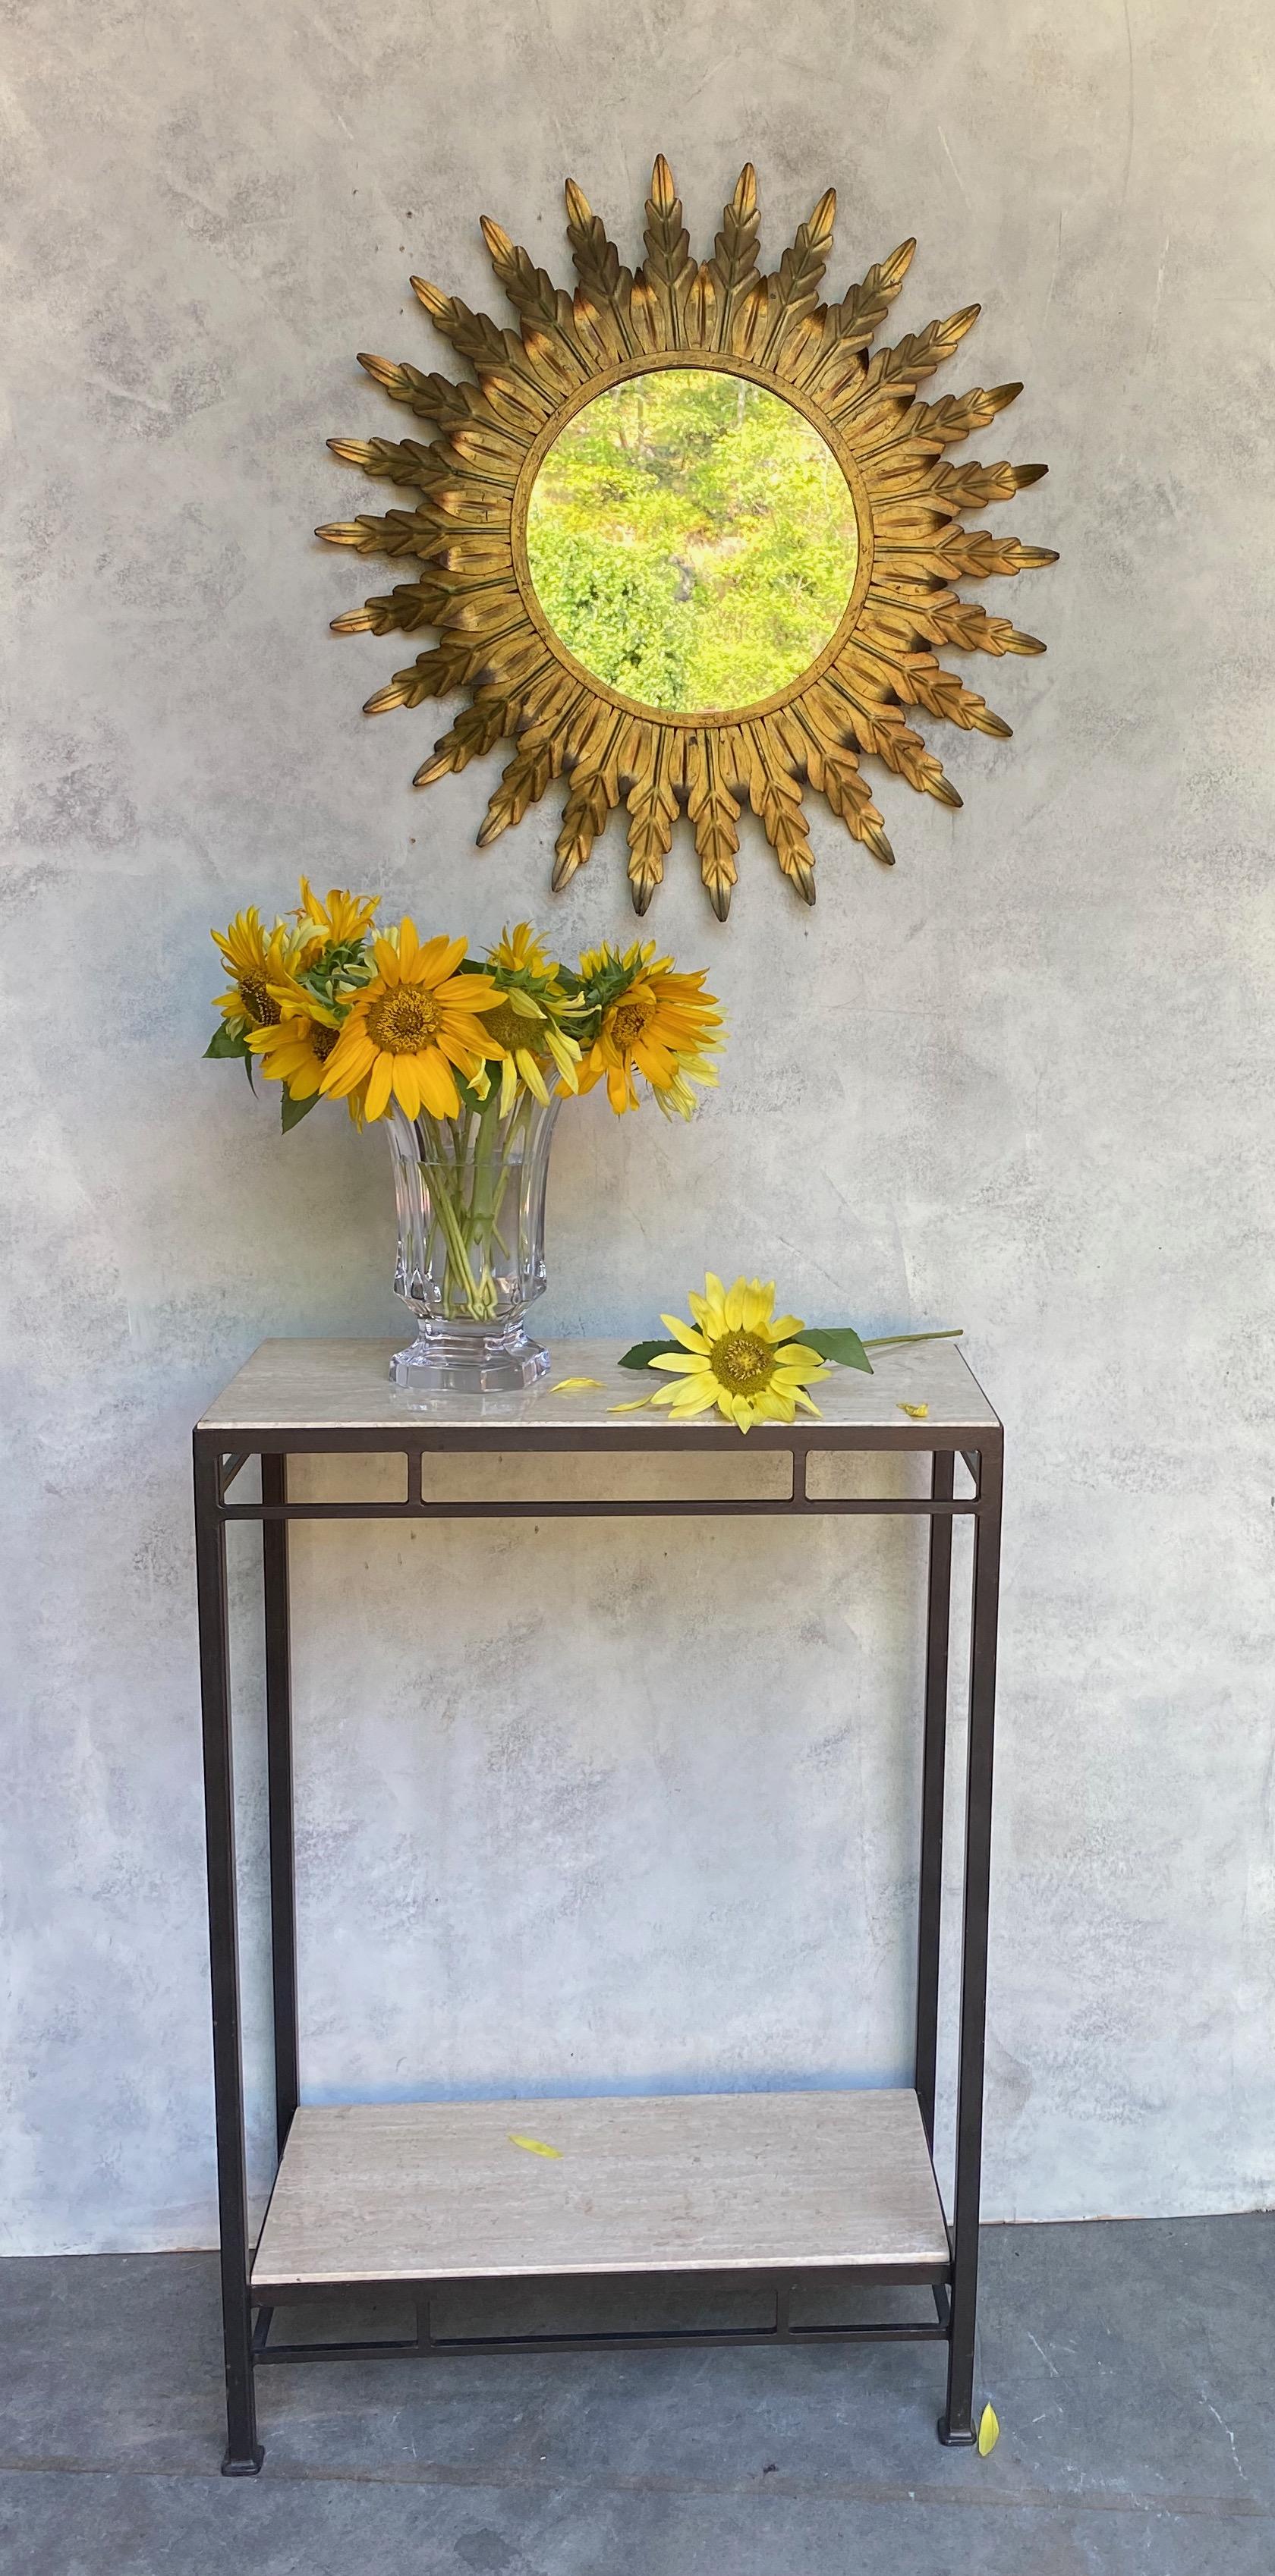 Spanish gilt metal mirror with closely joined sunburst rays as stylized leaves around a solid border. We recently added a felt backing to the mirror to give it more protection and a finished look. Spanish 1950's. Very good vintage condition. 
 